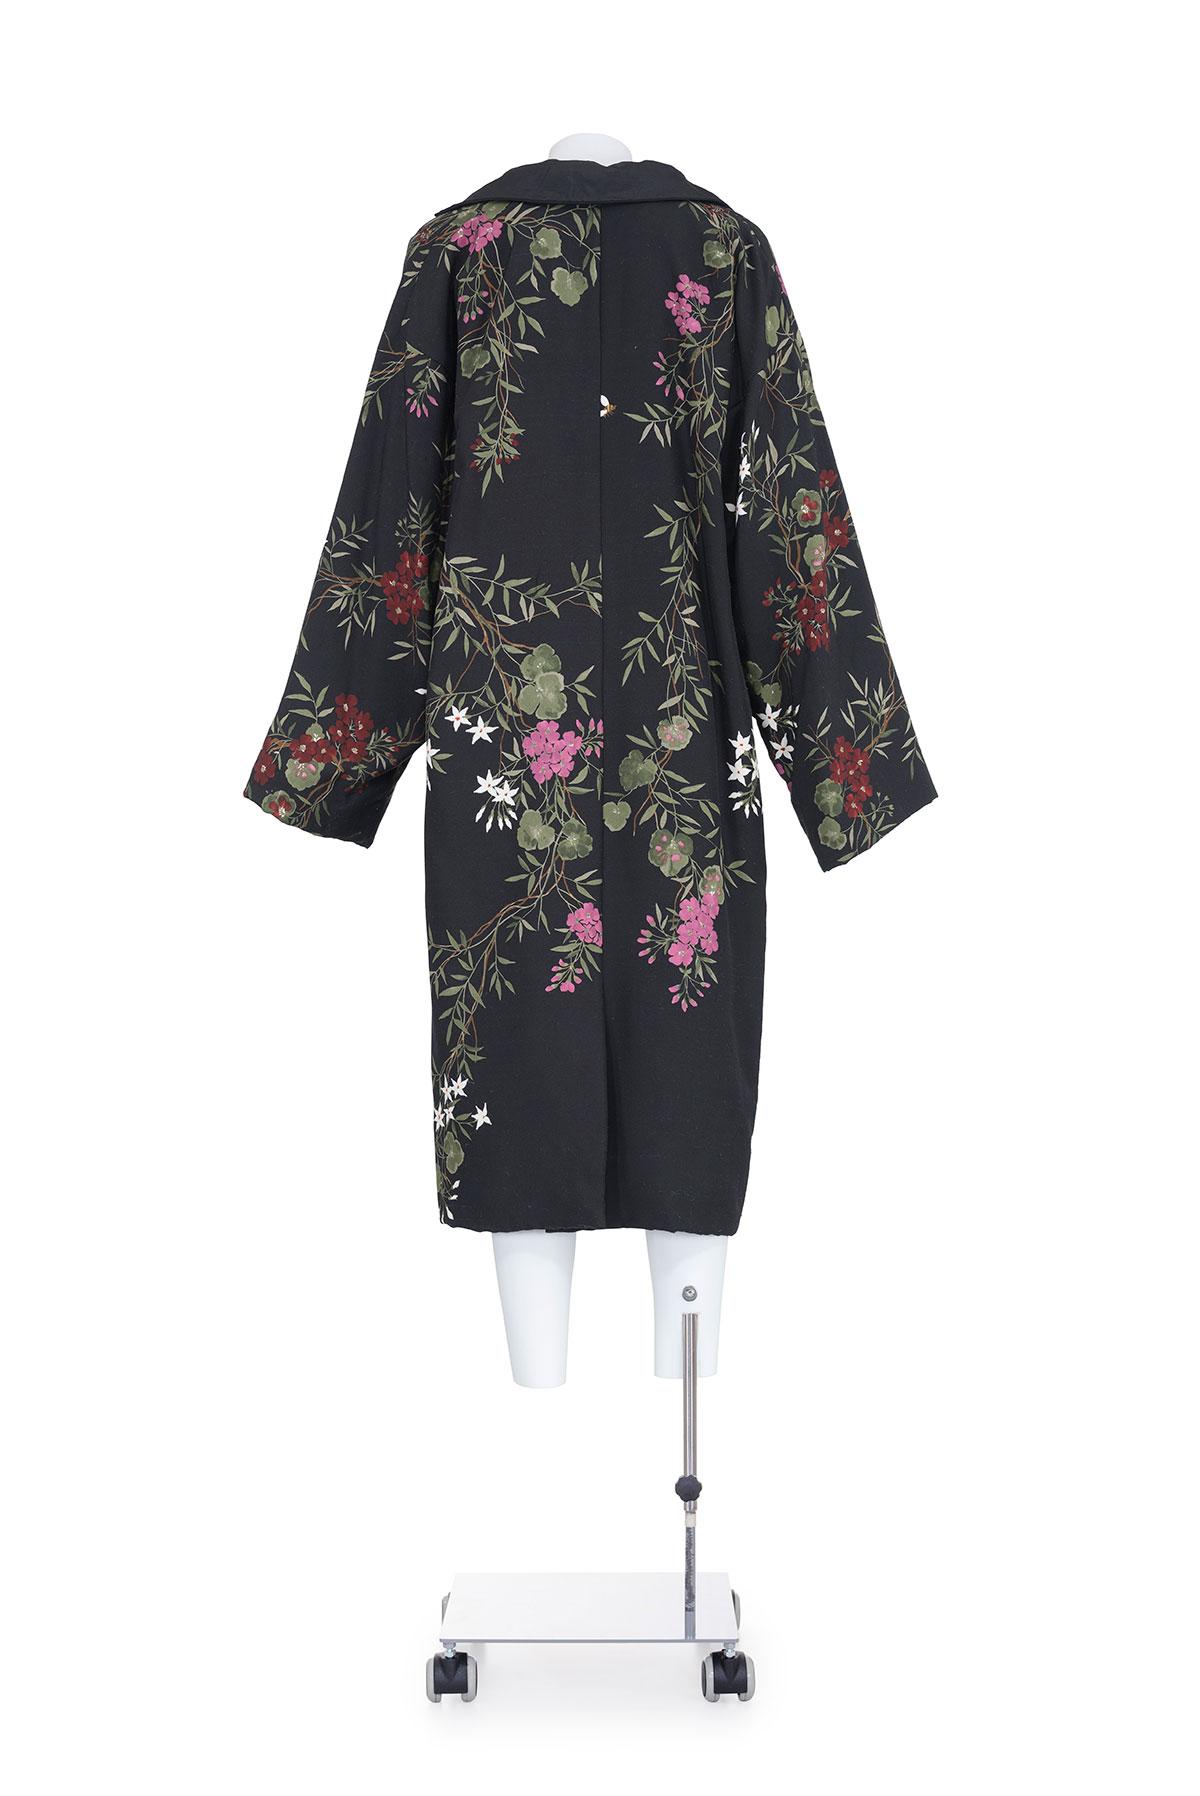 DOLCE & GABBANA FW 98 Rare Floral Painted Shantung Coat In Good Condition For Sale In Milano, MILANO